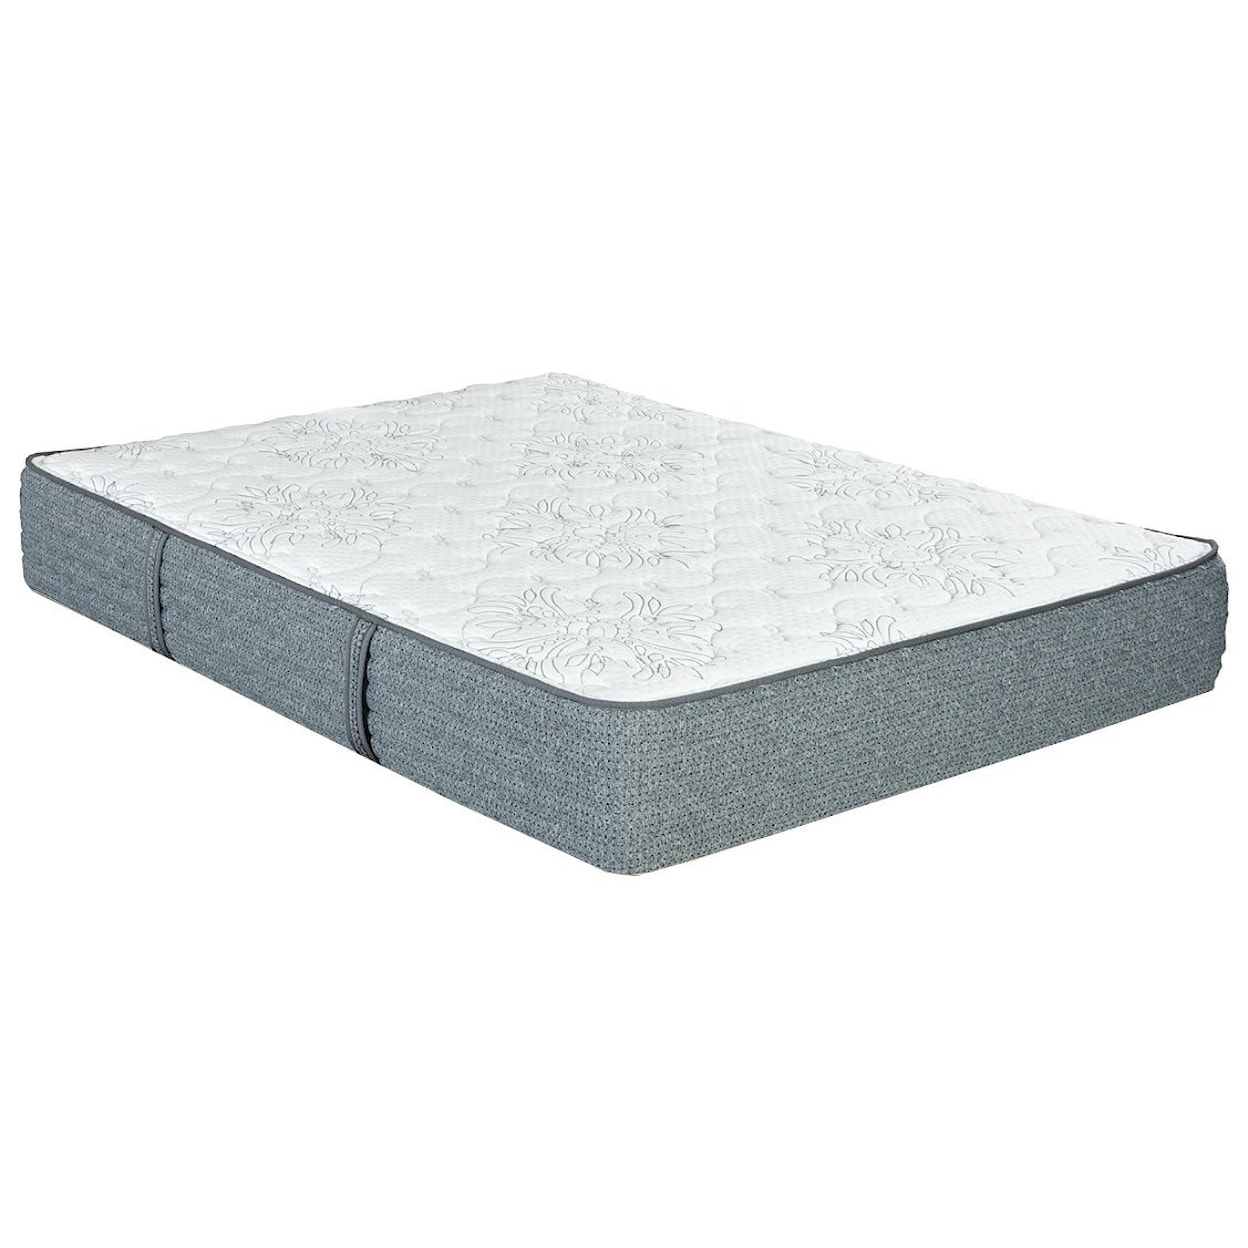 King Koil Laura Ashley Elise X Firm Full 11" Extra Firm Mattress